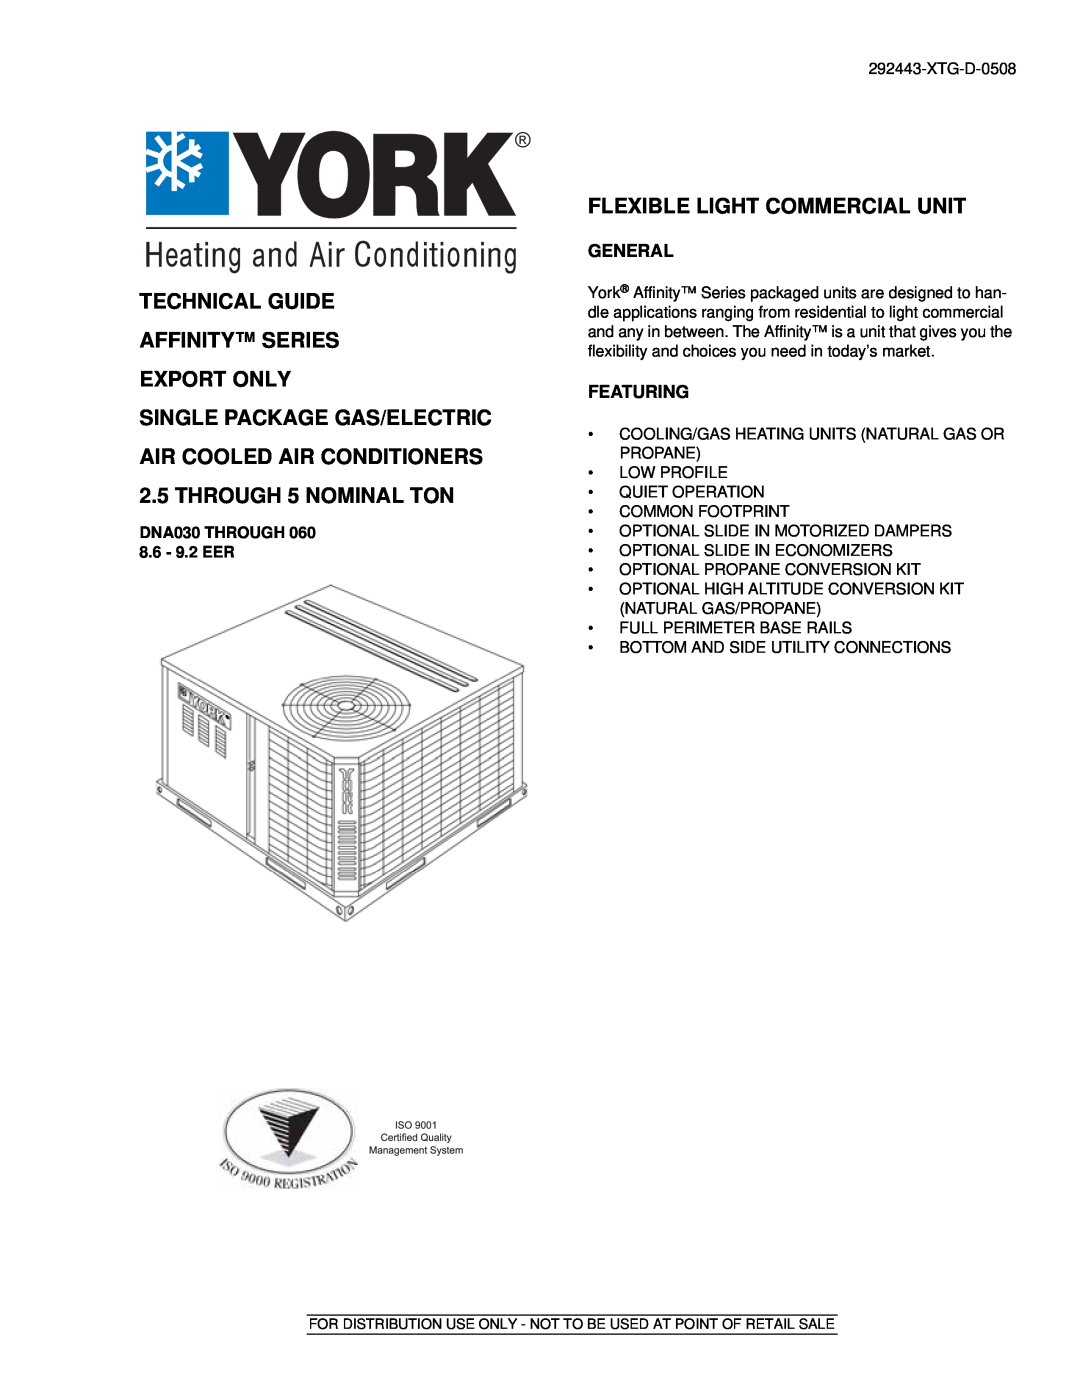 York 292443-XTG-D-0508 manual Technical Guide Affinity Series Export Only, Flexible Light Commercial Unit, General 